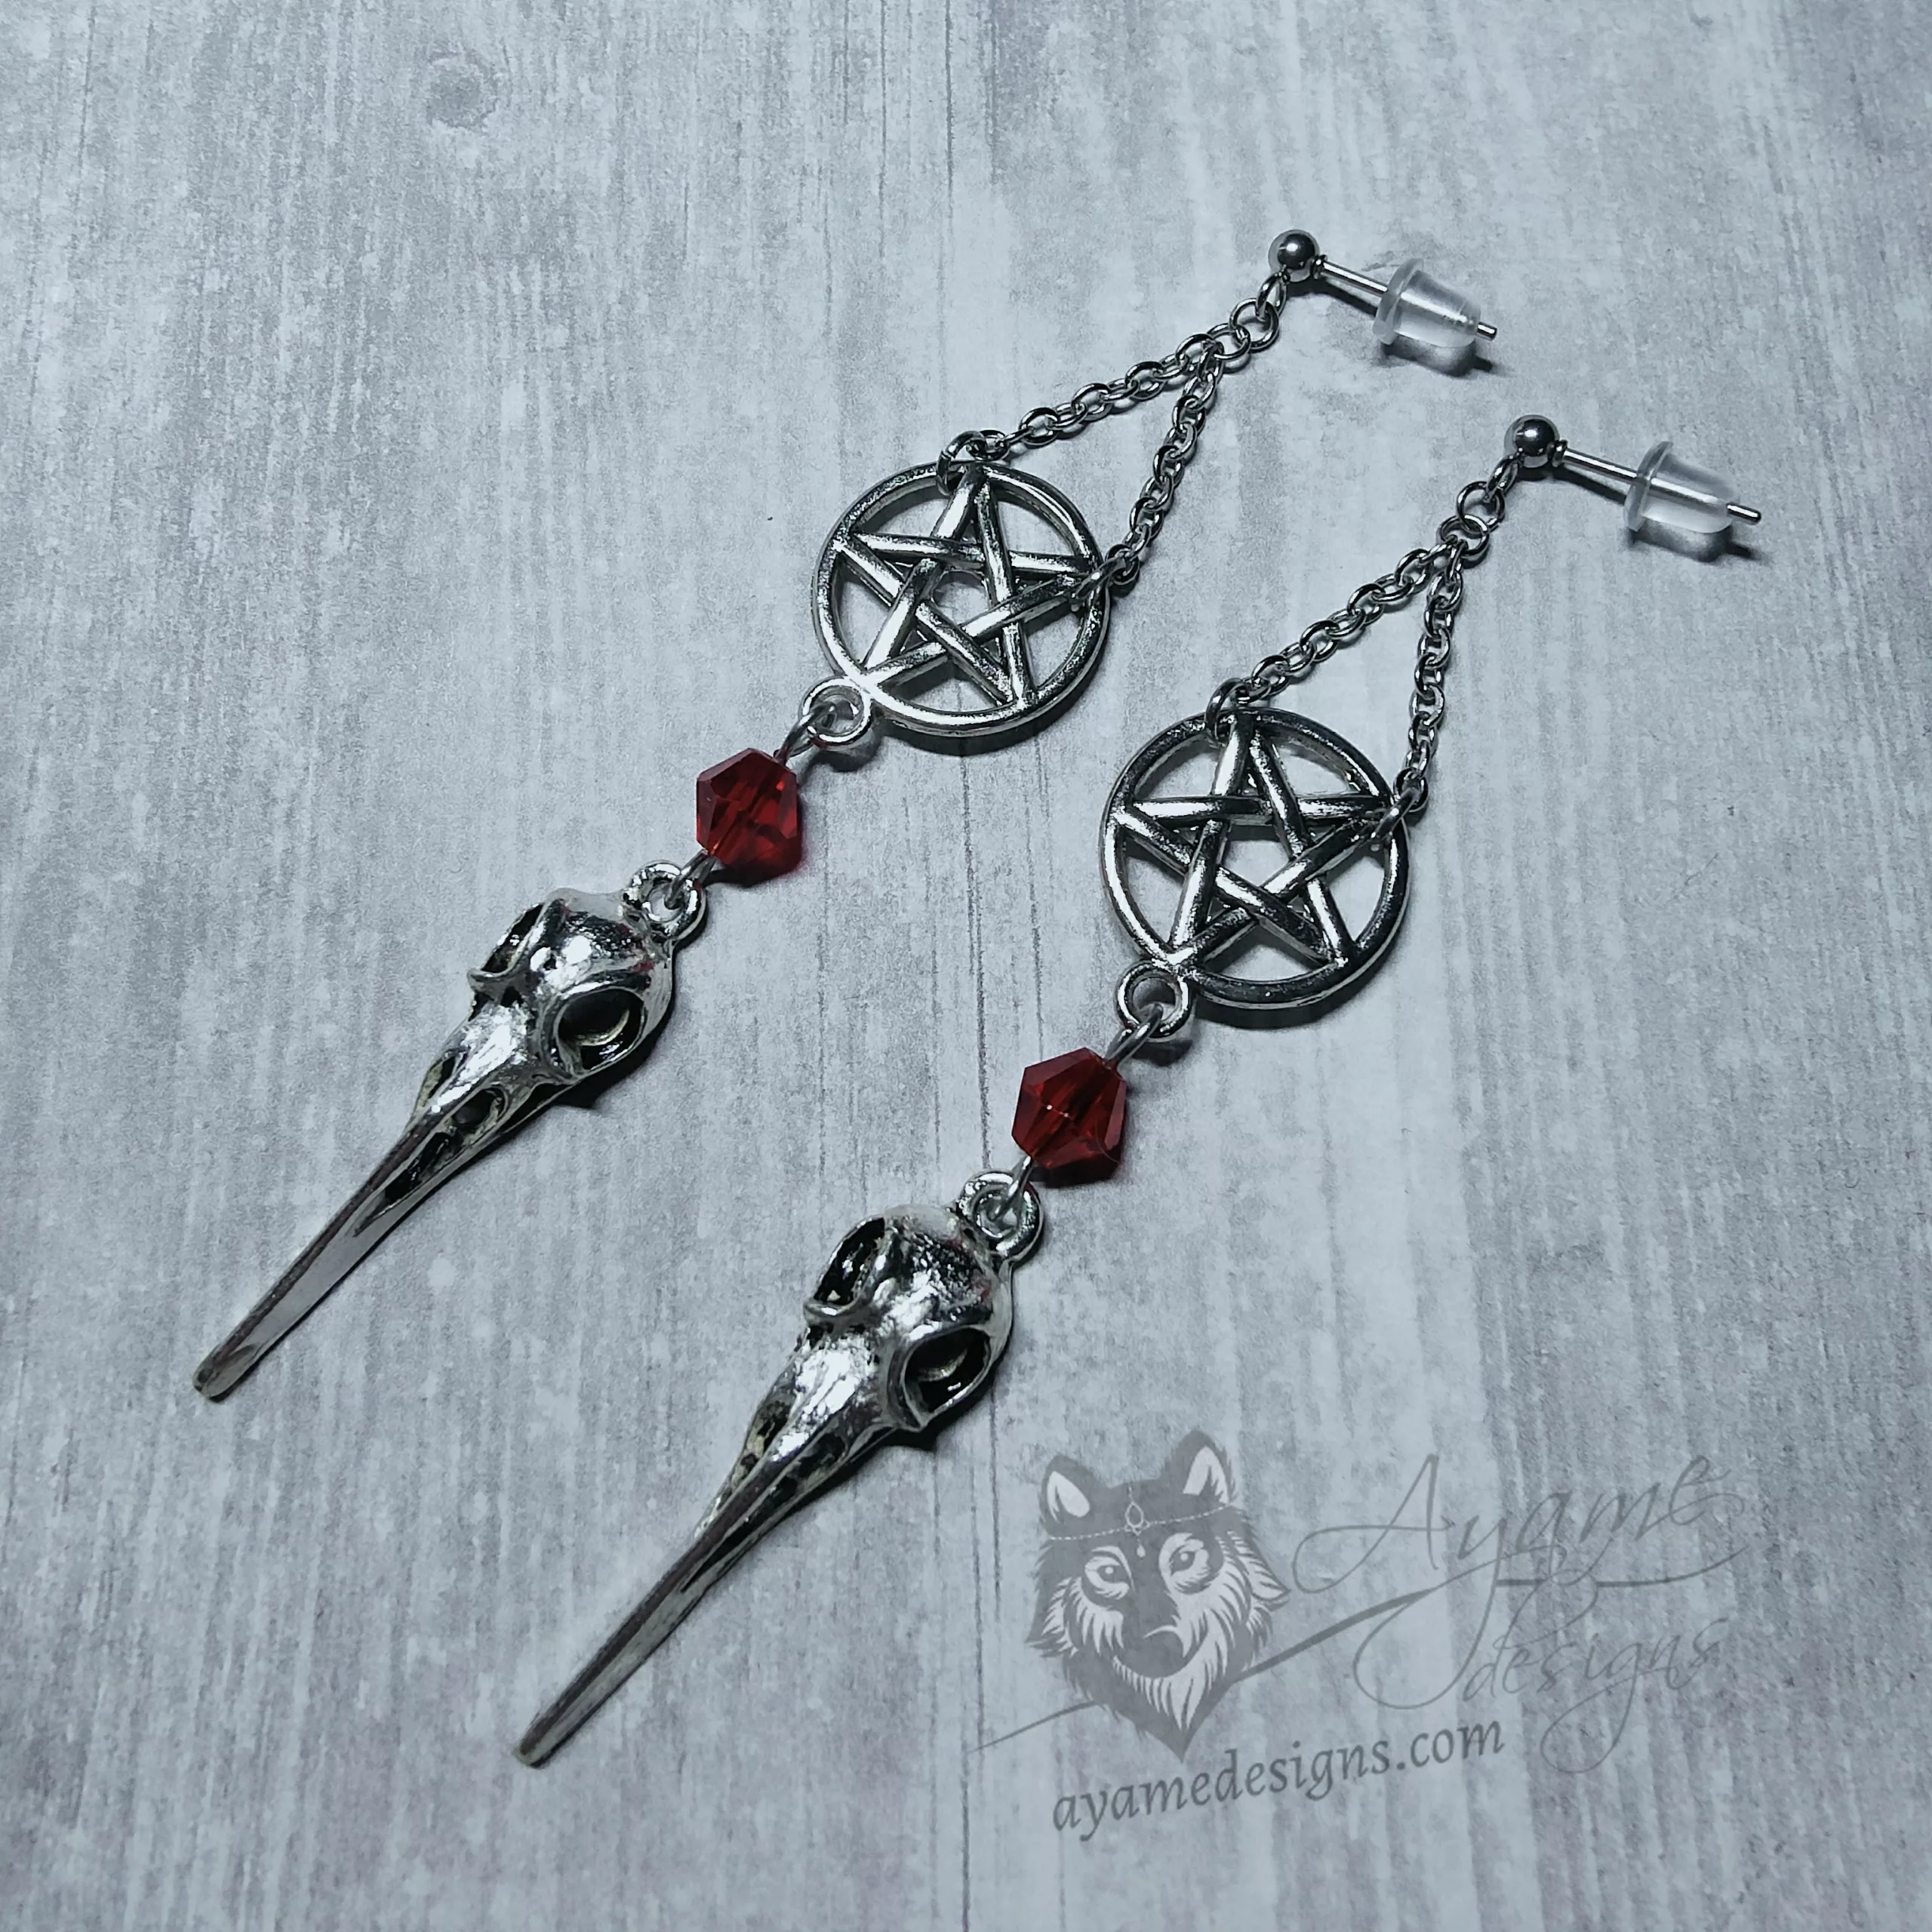 Handmade gothic earrings with bird skull and inverted pentacle charms and red Austrian crystal beads on stainless steel earring studs